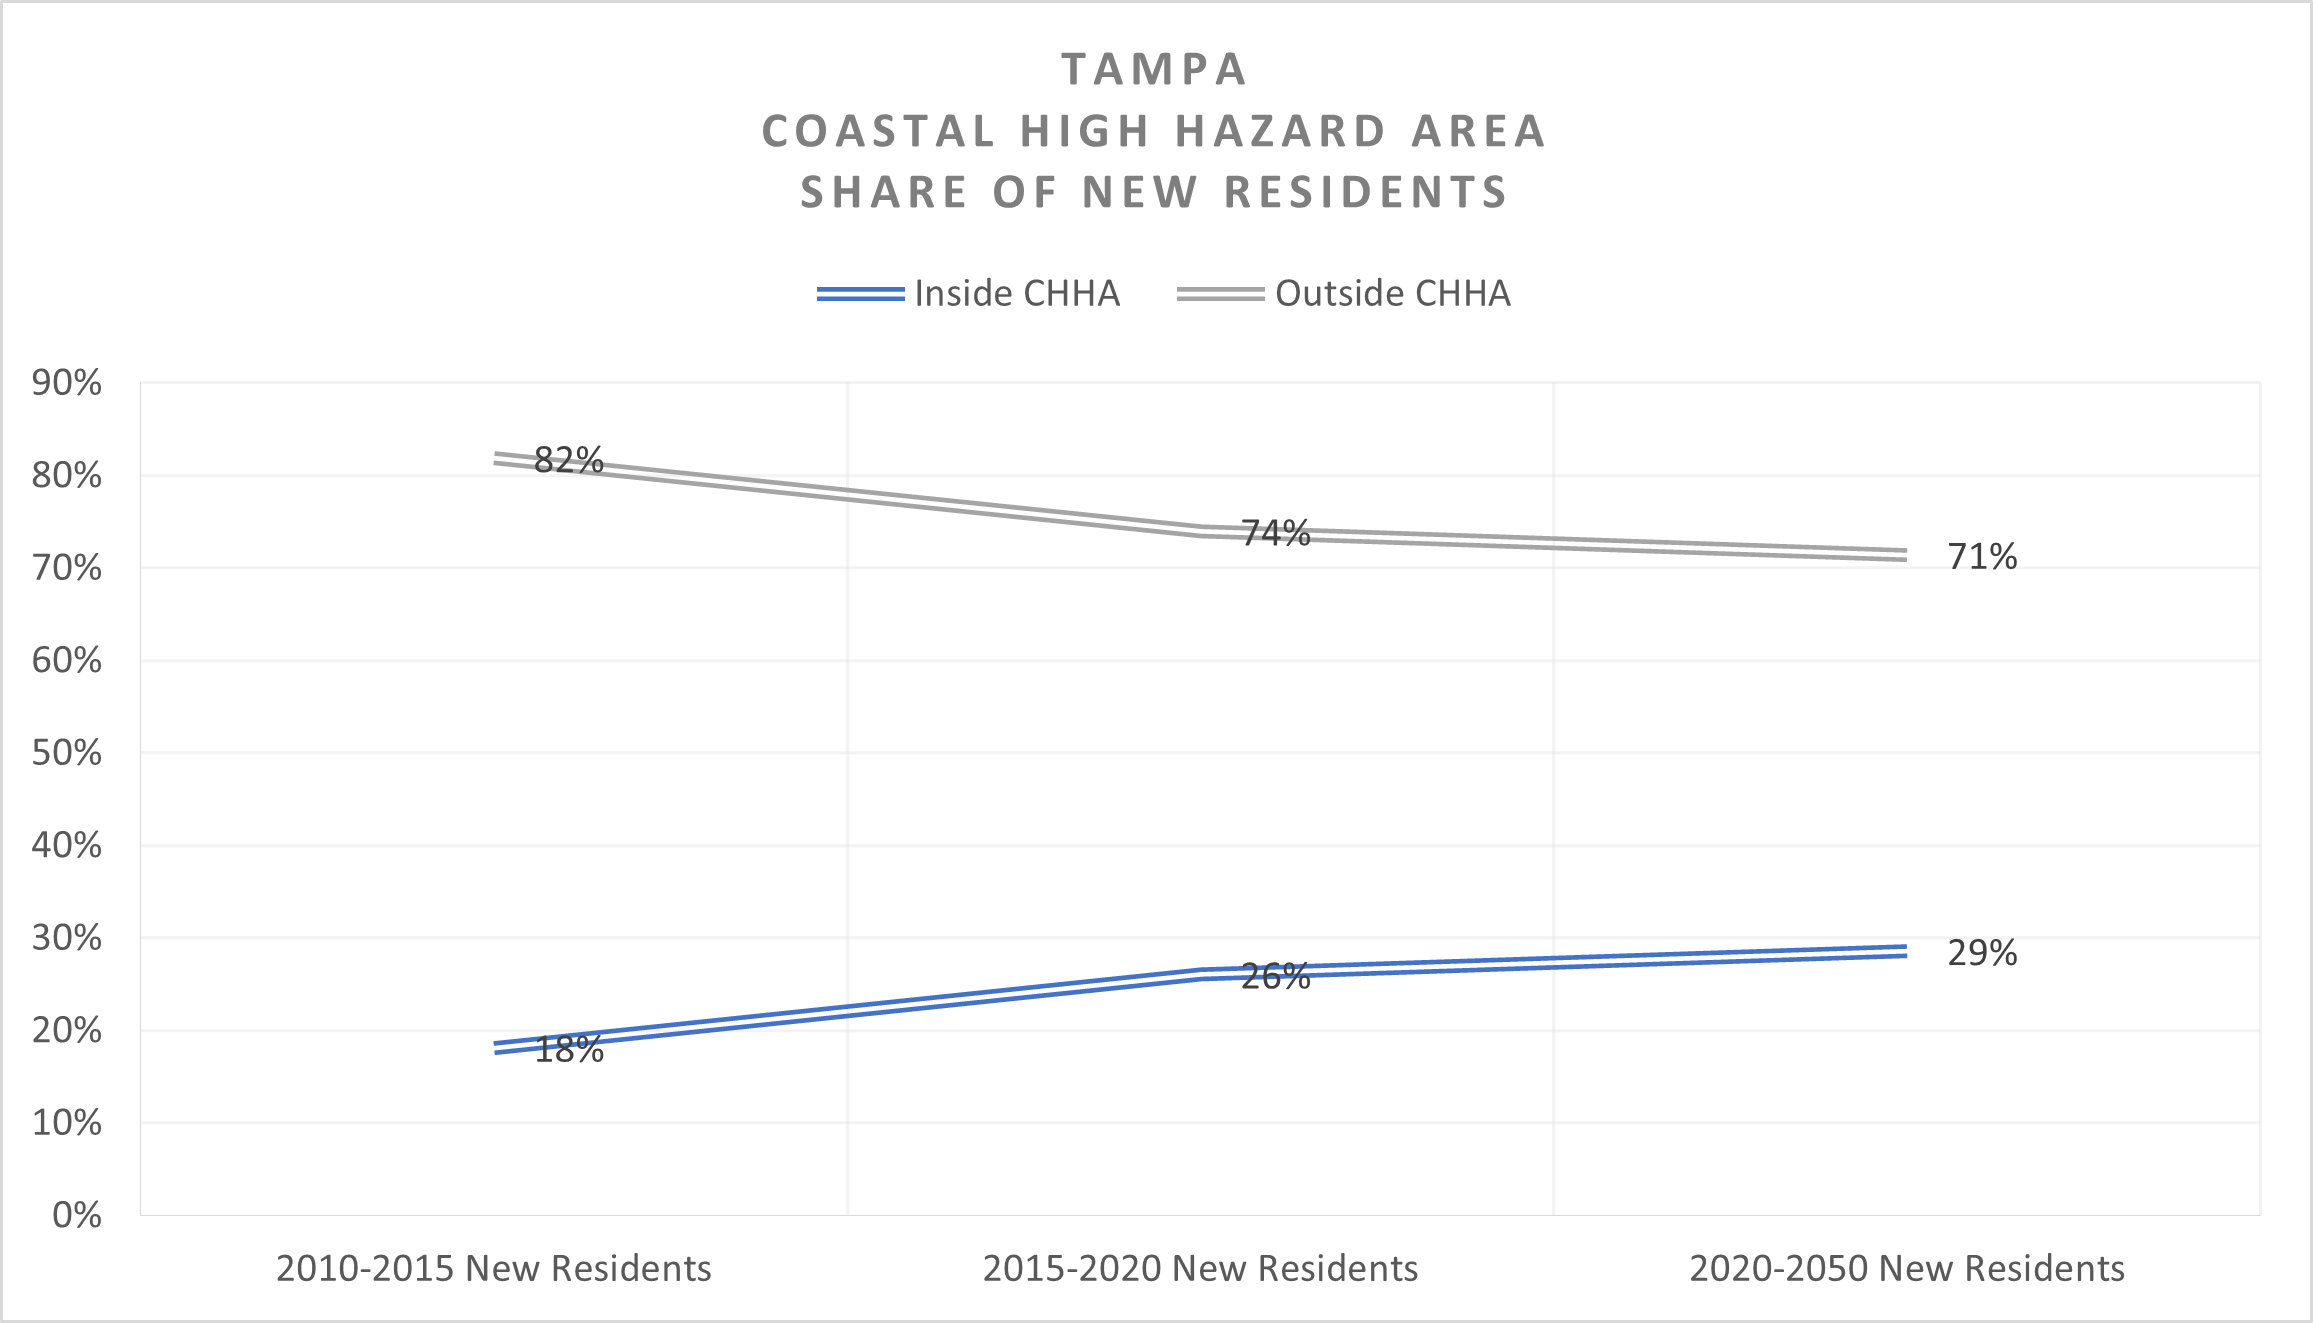 This chart shows Tampa's share of new residents inside and outside the CHHA. From 2015 to 2020, 26% of the new residents moved inside the CHHA and 74% of the new residents moved outside CHHA. From 2020 to 2050, the share new residents inside CHHA is expected to increase slightly. Namely, 29% of the new residents are expected to move inside the CHHA and 71% of the county's new residents are expected to move outside CHHA.